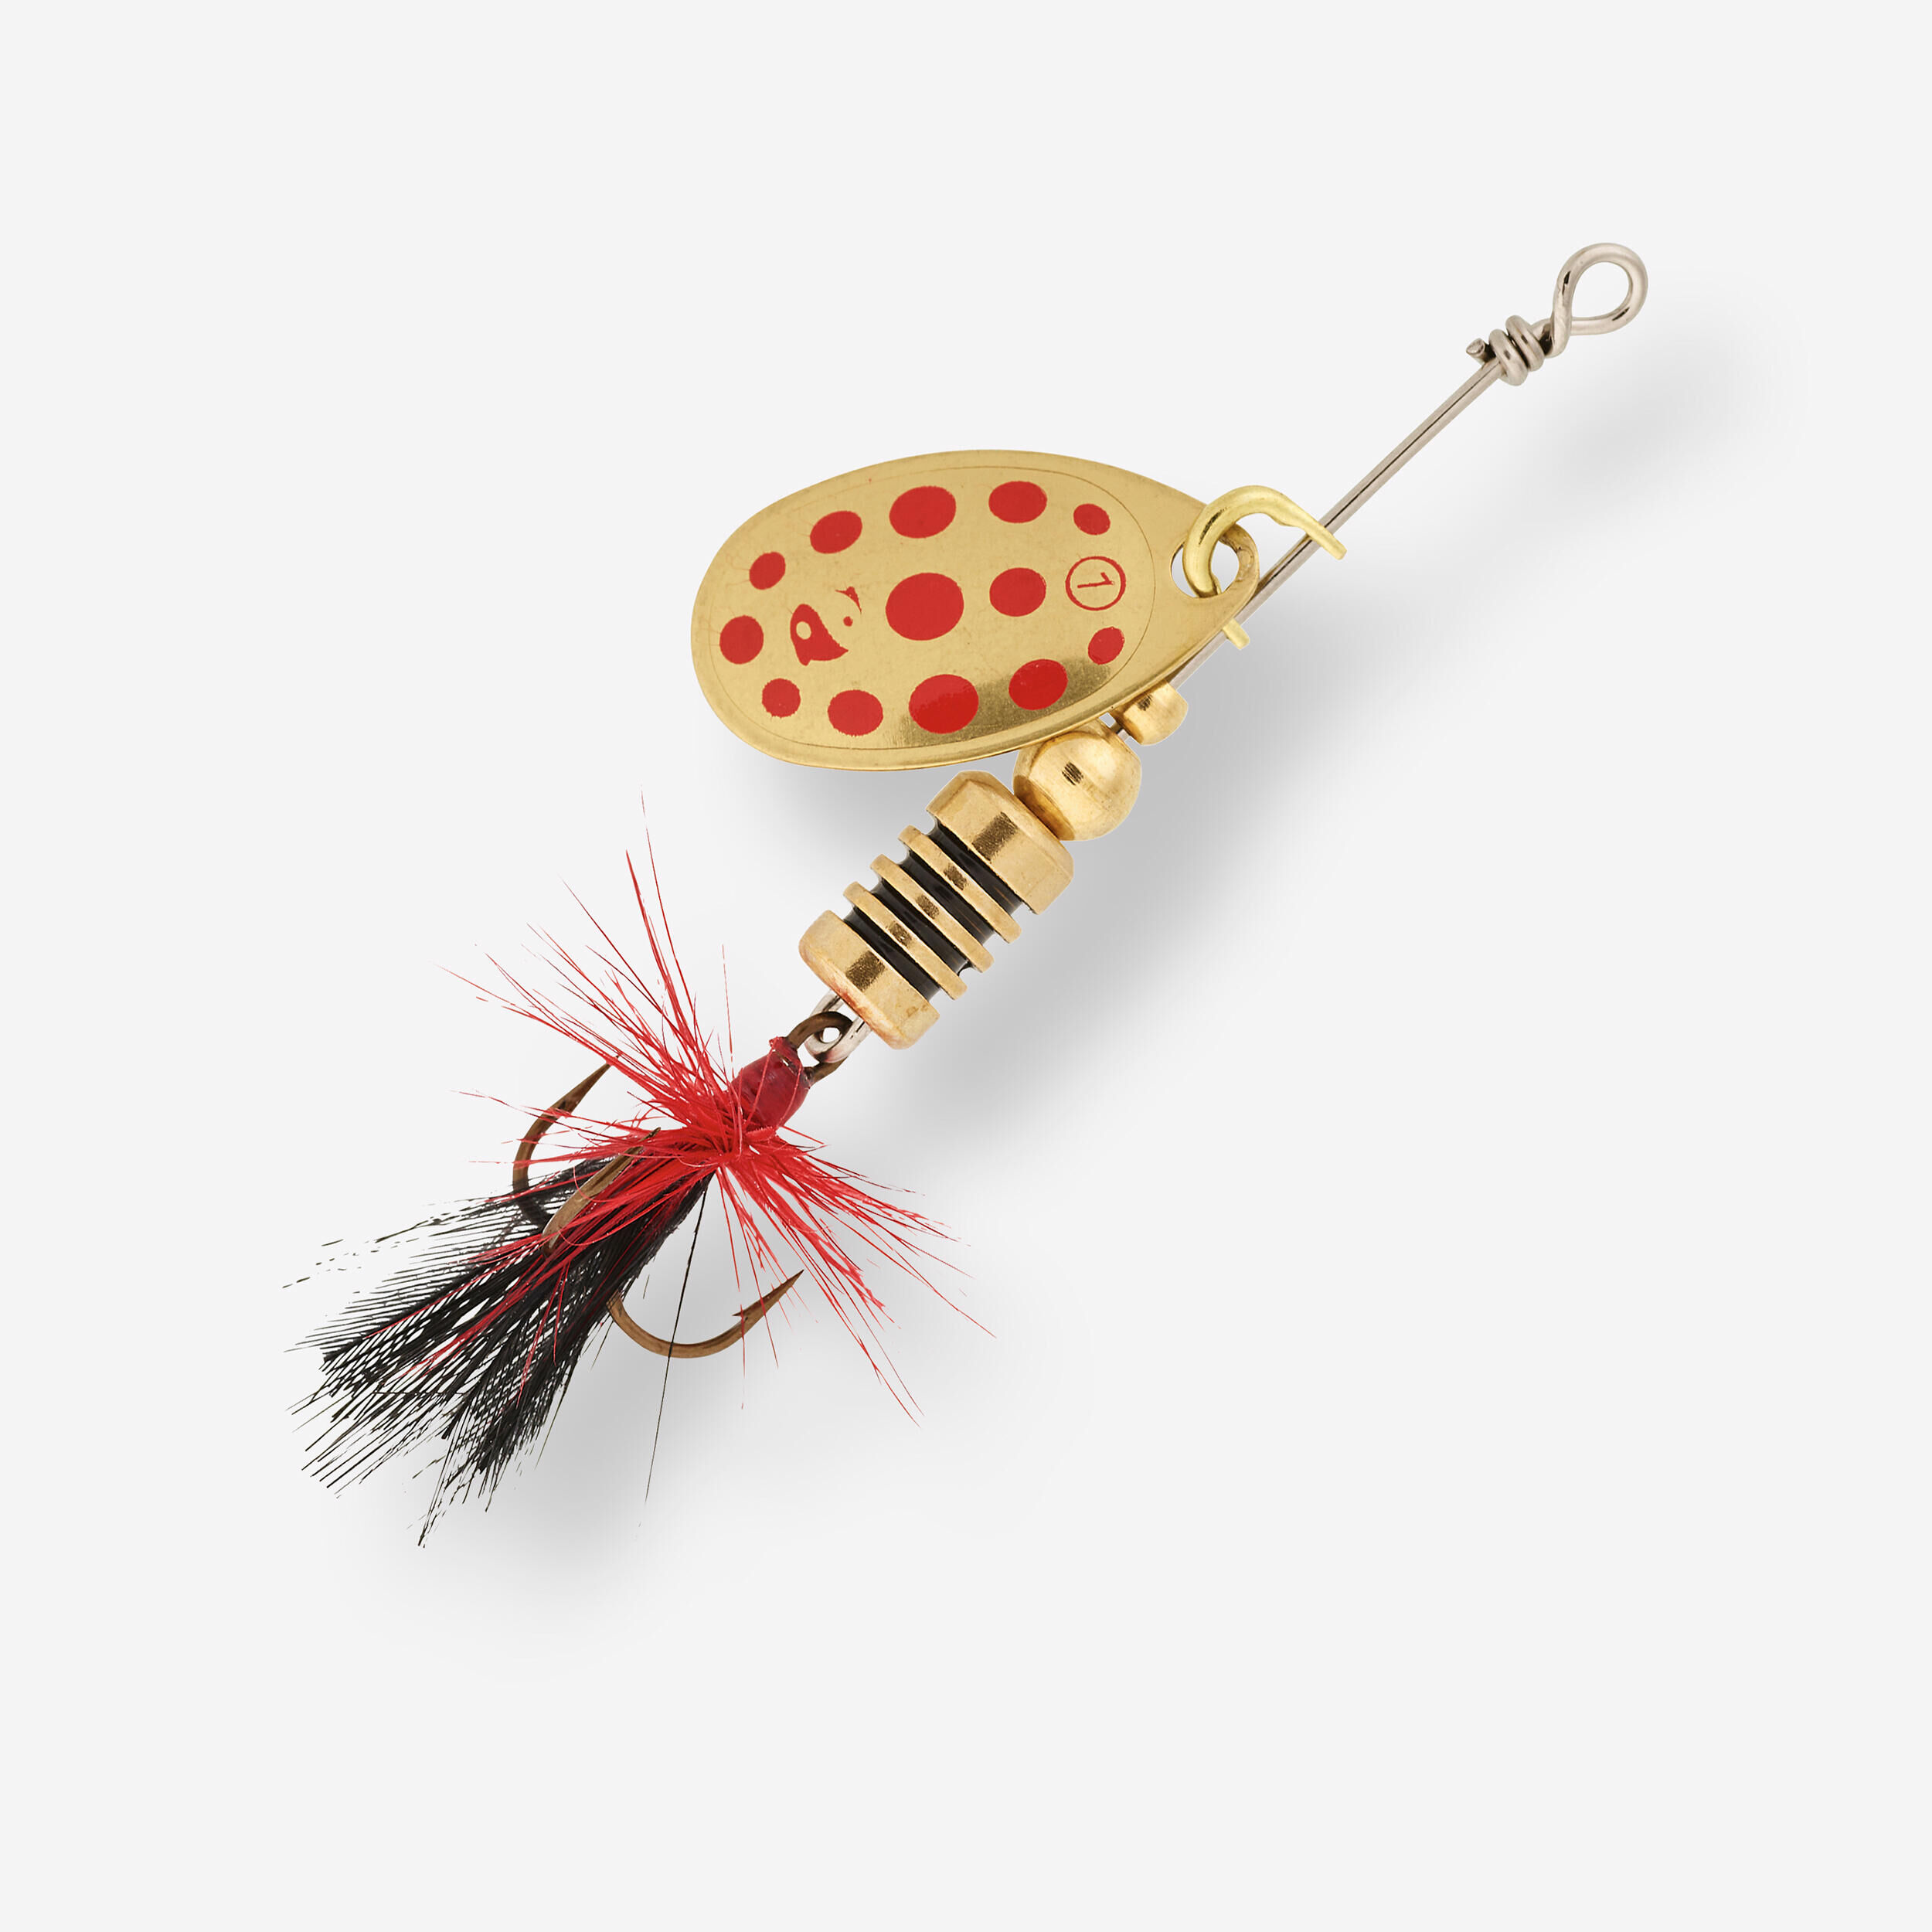 CAPERLAN LURE FISHING SPINNING SPOON WETA F #1 - GOLD RED DOTS